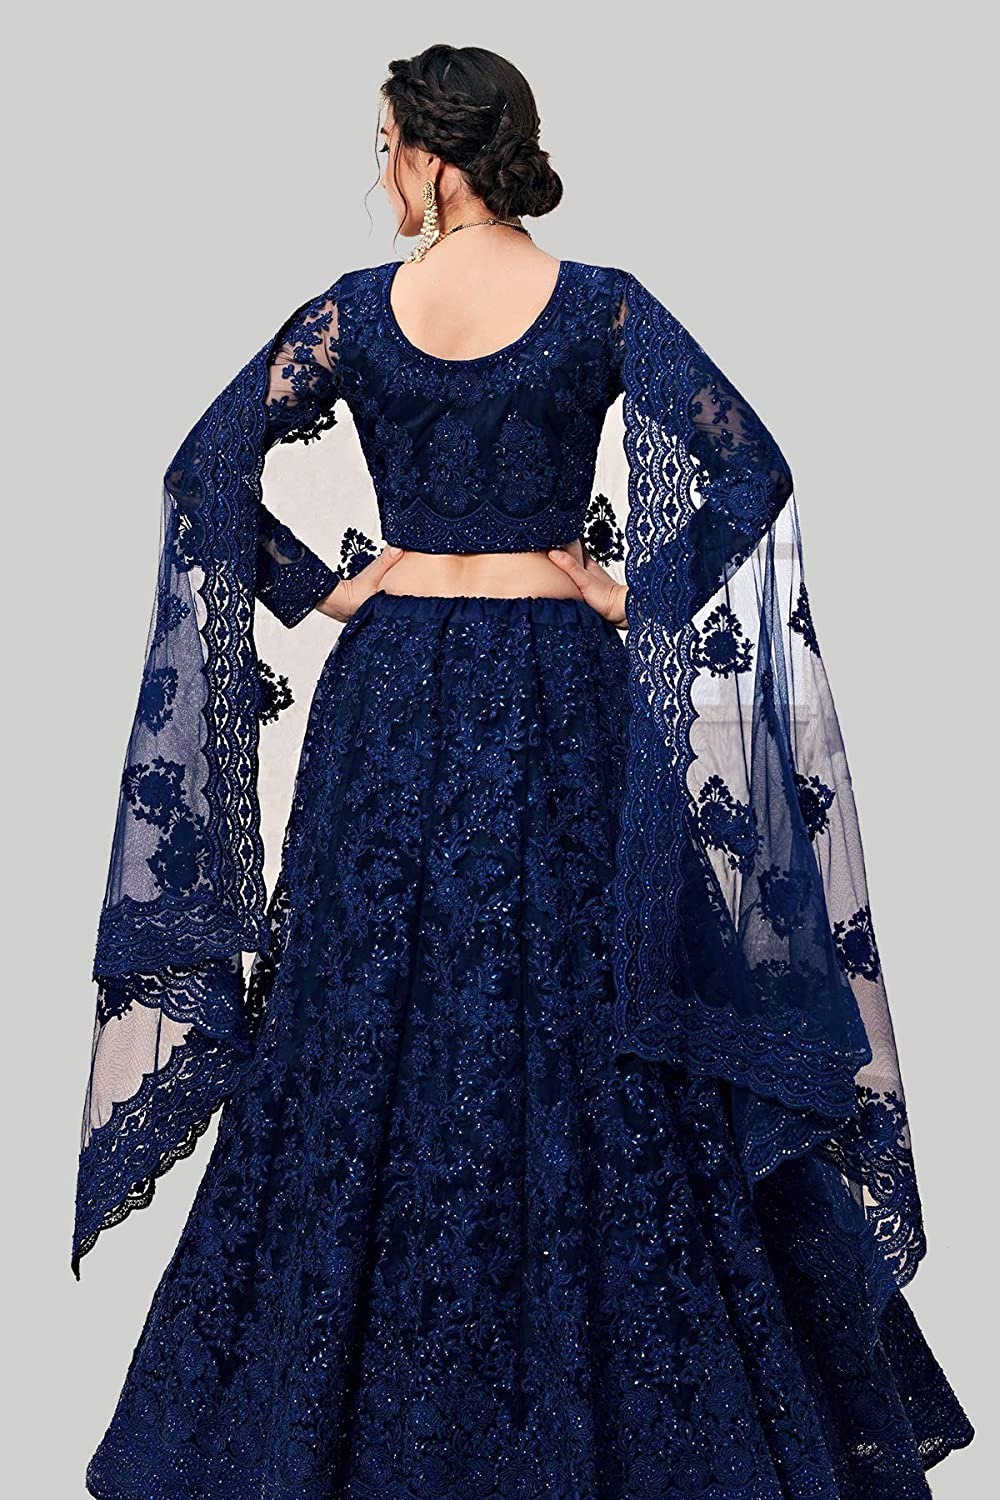 Bollyclues Women's Net Embroidered Semi-Stitched Lehenga Choli -  DRESSES in Sri Lanka from Arcade Online Shopping - Just Rs. 7999!